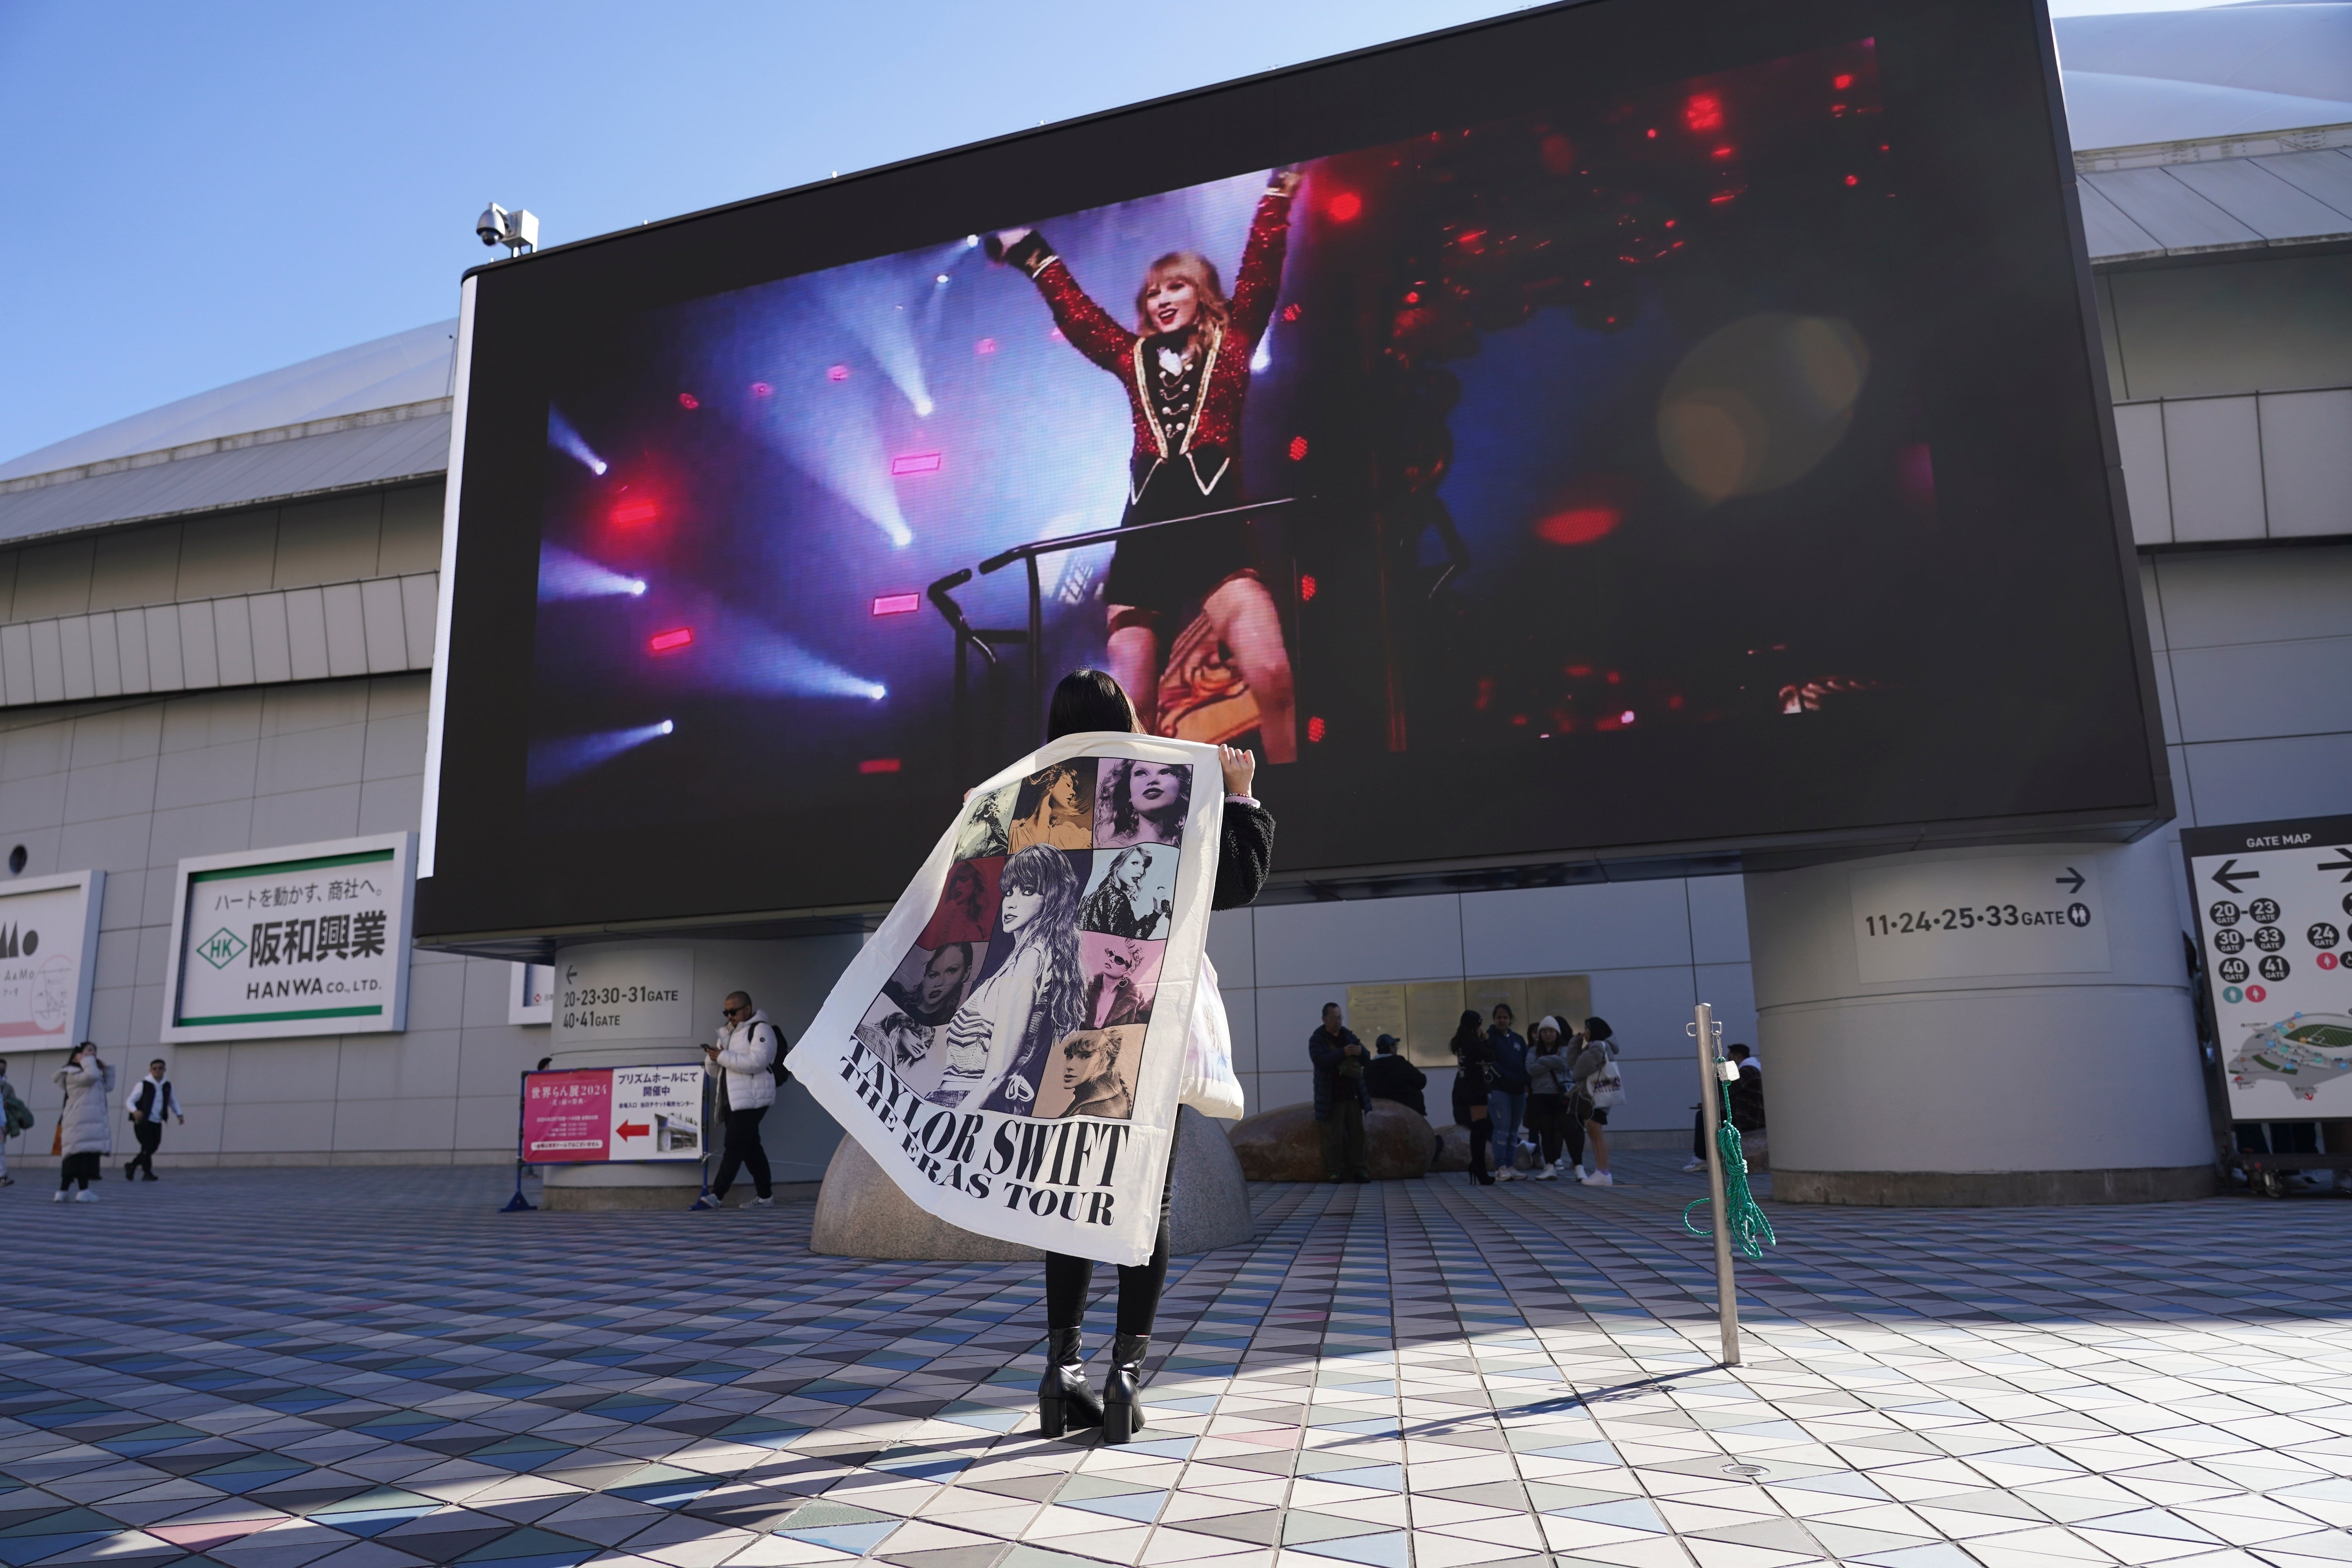 A fan arrives at the Tokyo Dome, for the Taylor Swift concert, as part of the ‘Eras Tour’ on 7 February